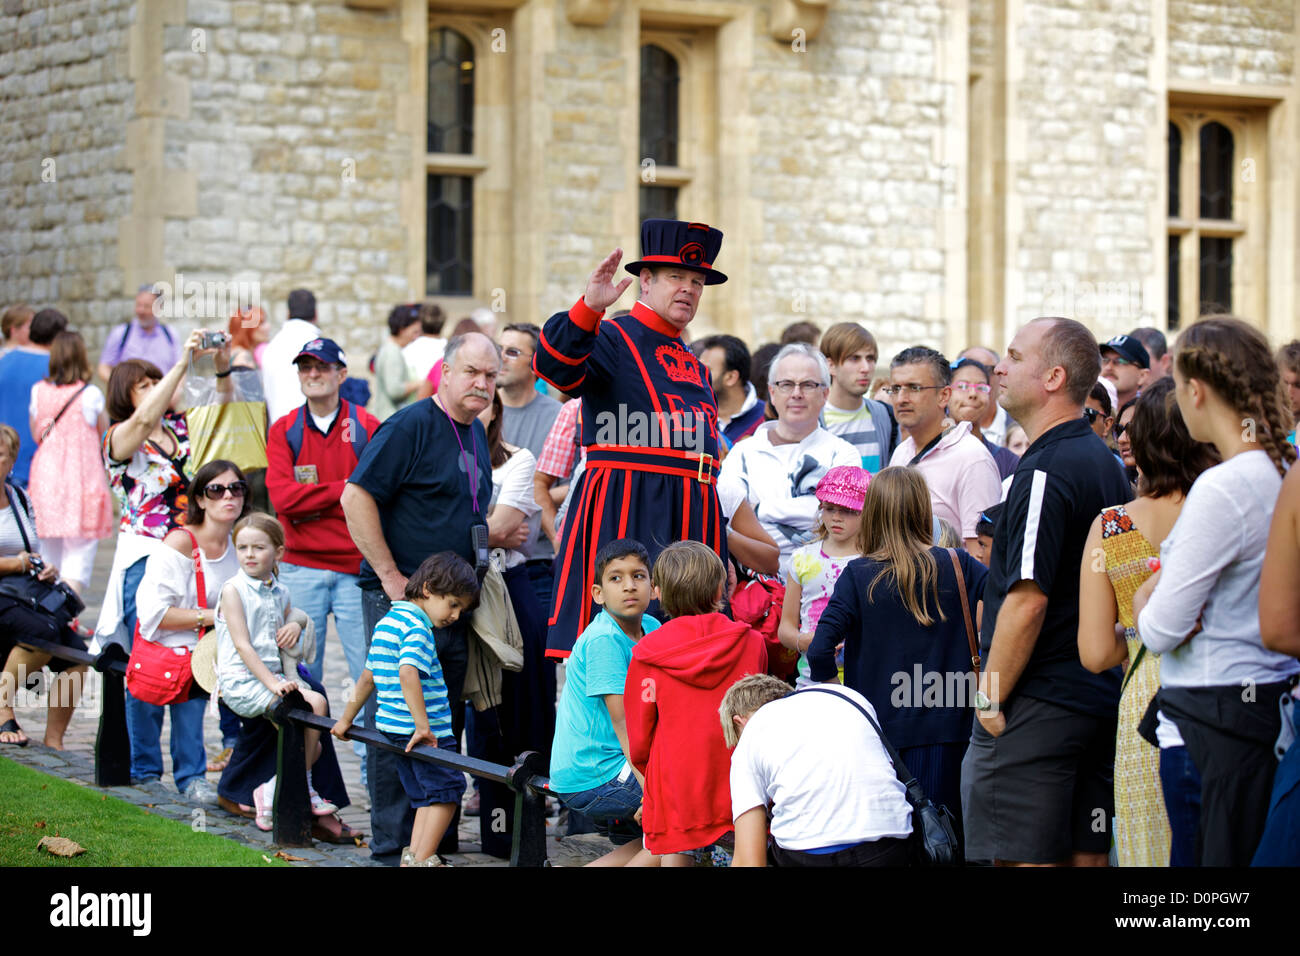 Beefeater Tour guide at the Tower of London, London, England, UK, Europe Stock Photo